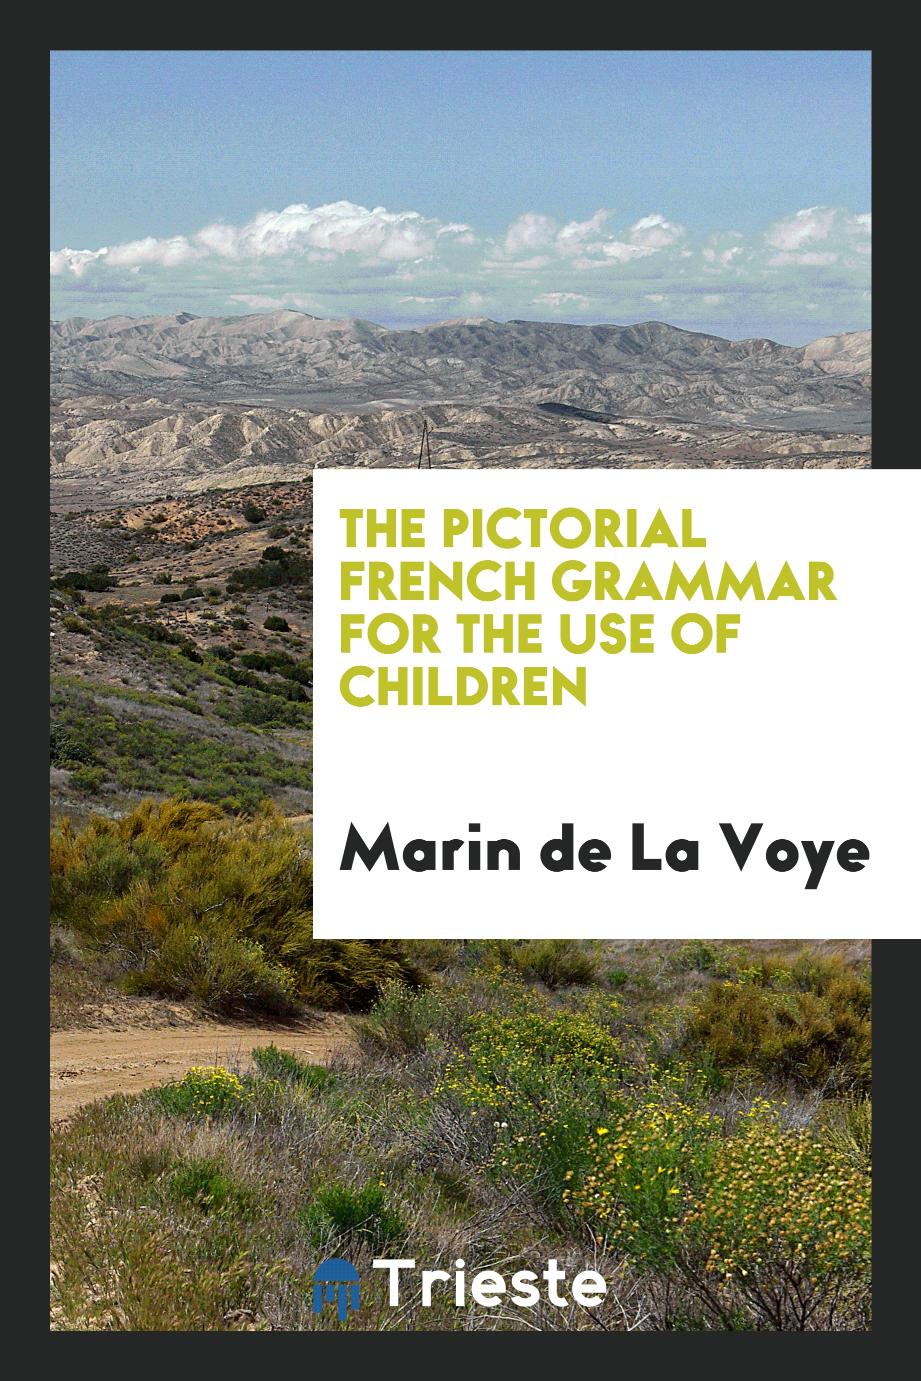 The pictorial French grammar for the use of children